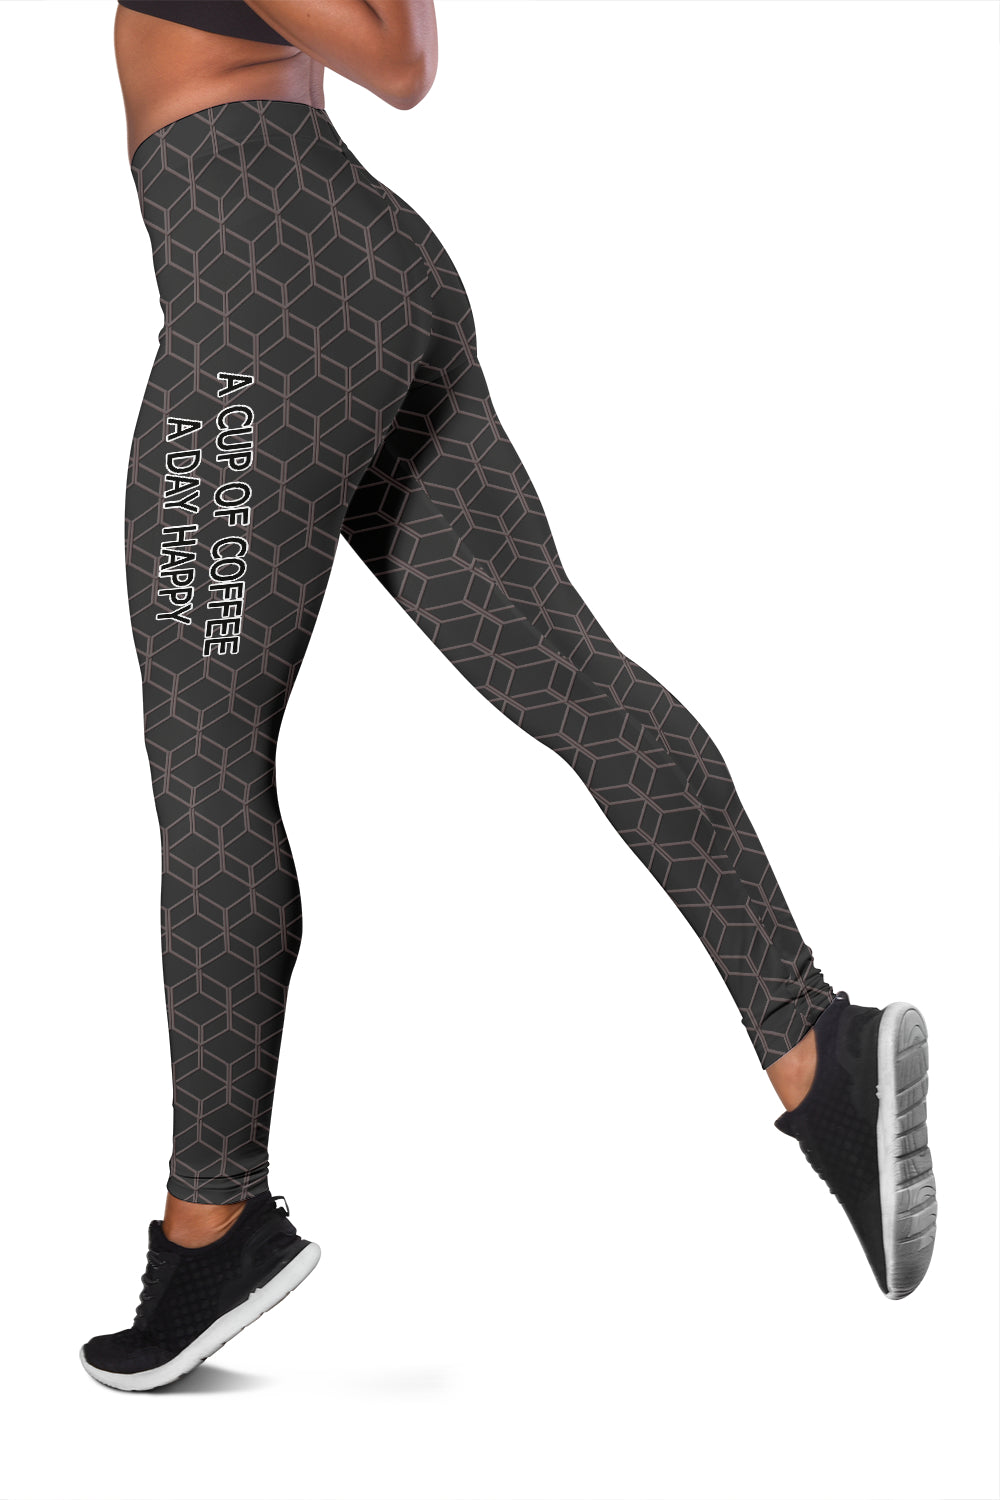 A Cup Of Coffee A Day Women's Leggings - JaZazzy 